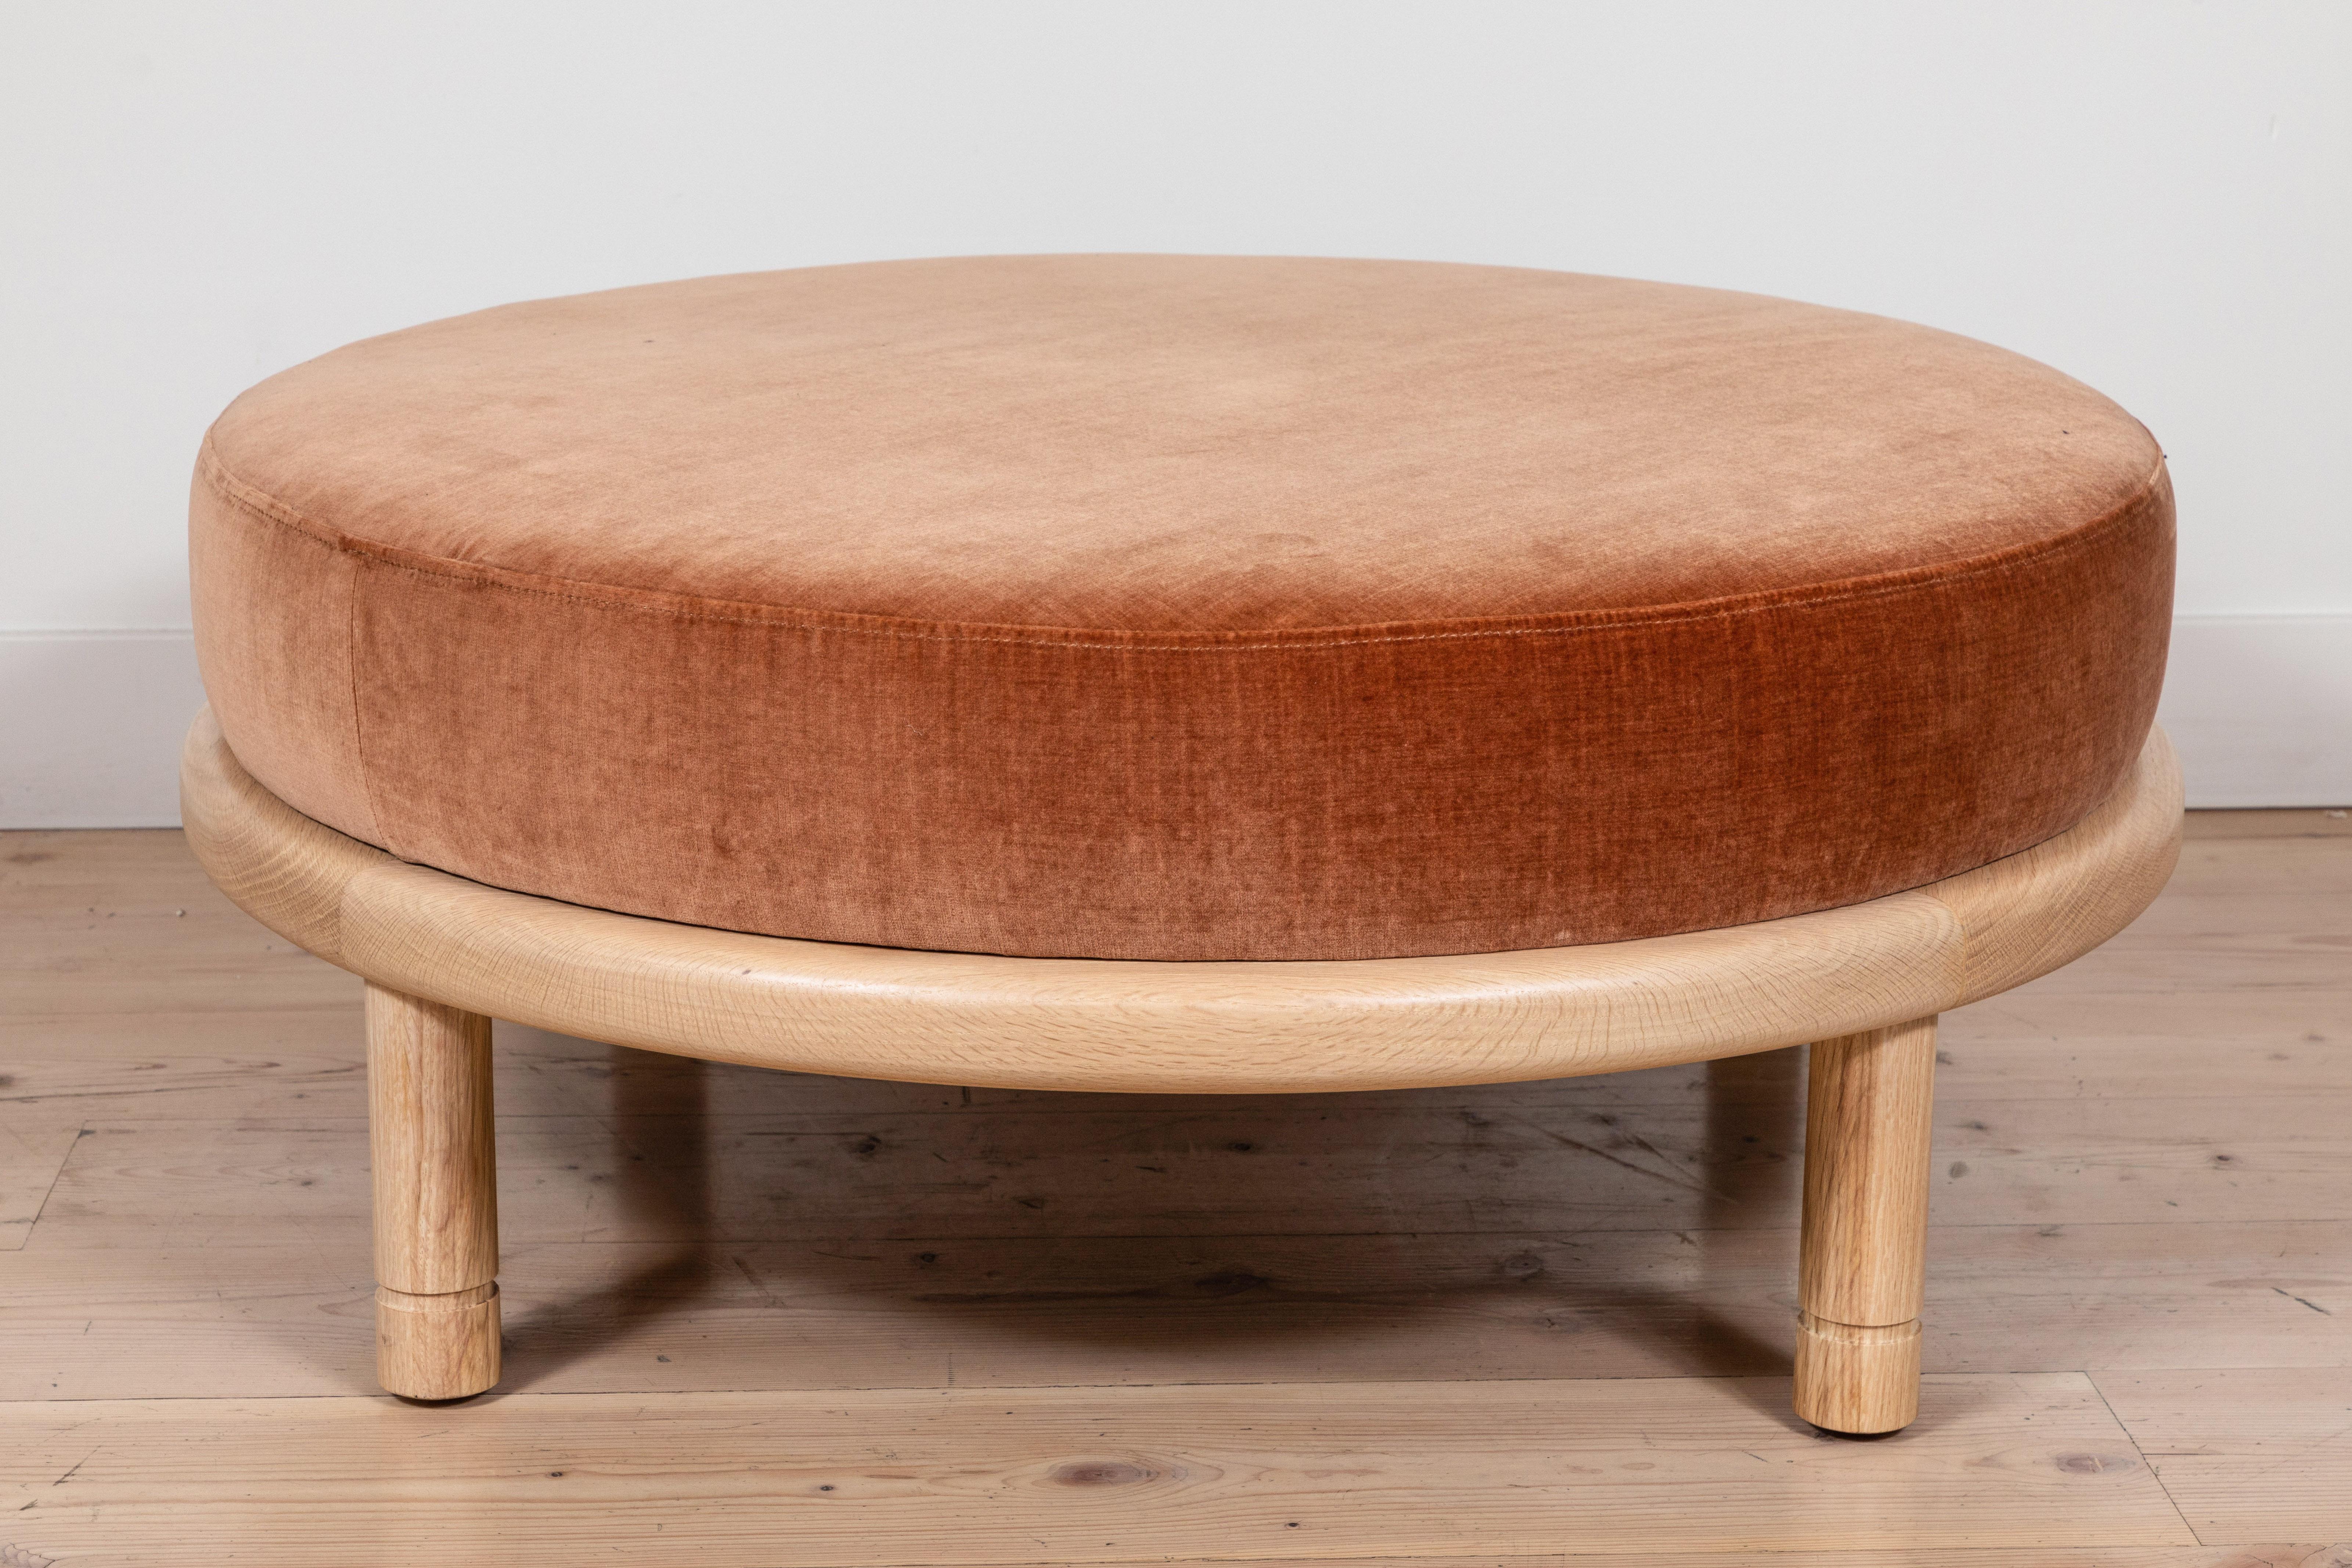 The Moreno Ottoman features a round solid wood base with four cylindrical legs and an upholstered top. Available in American walnut or white oak. Shown here in natural oak. Shown here in coral velvet and natural oak. 

The Lawson-Fenning